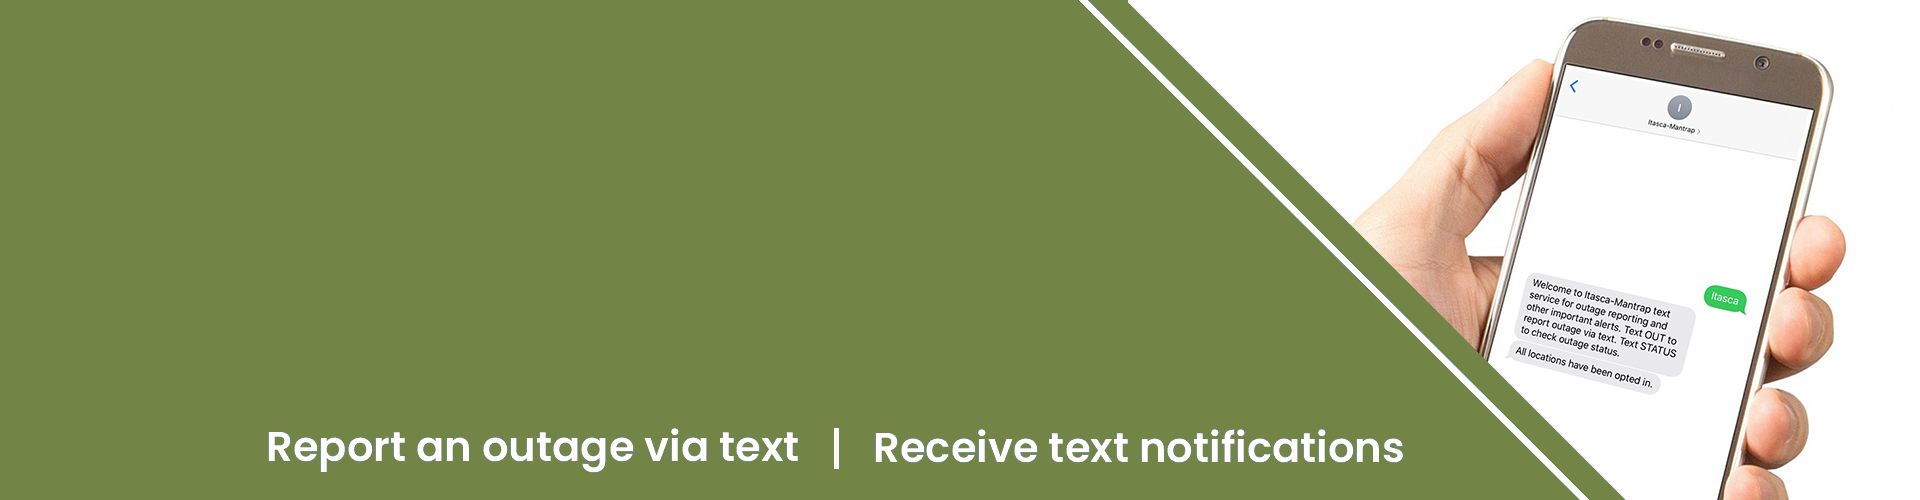 Sign up for Itasca-Mantrap text notifications.